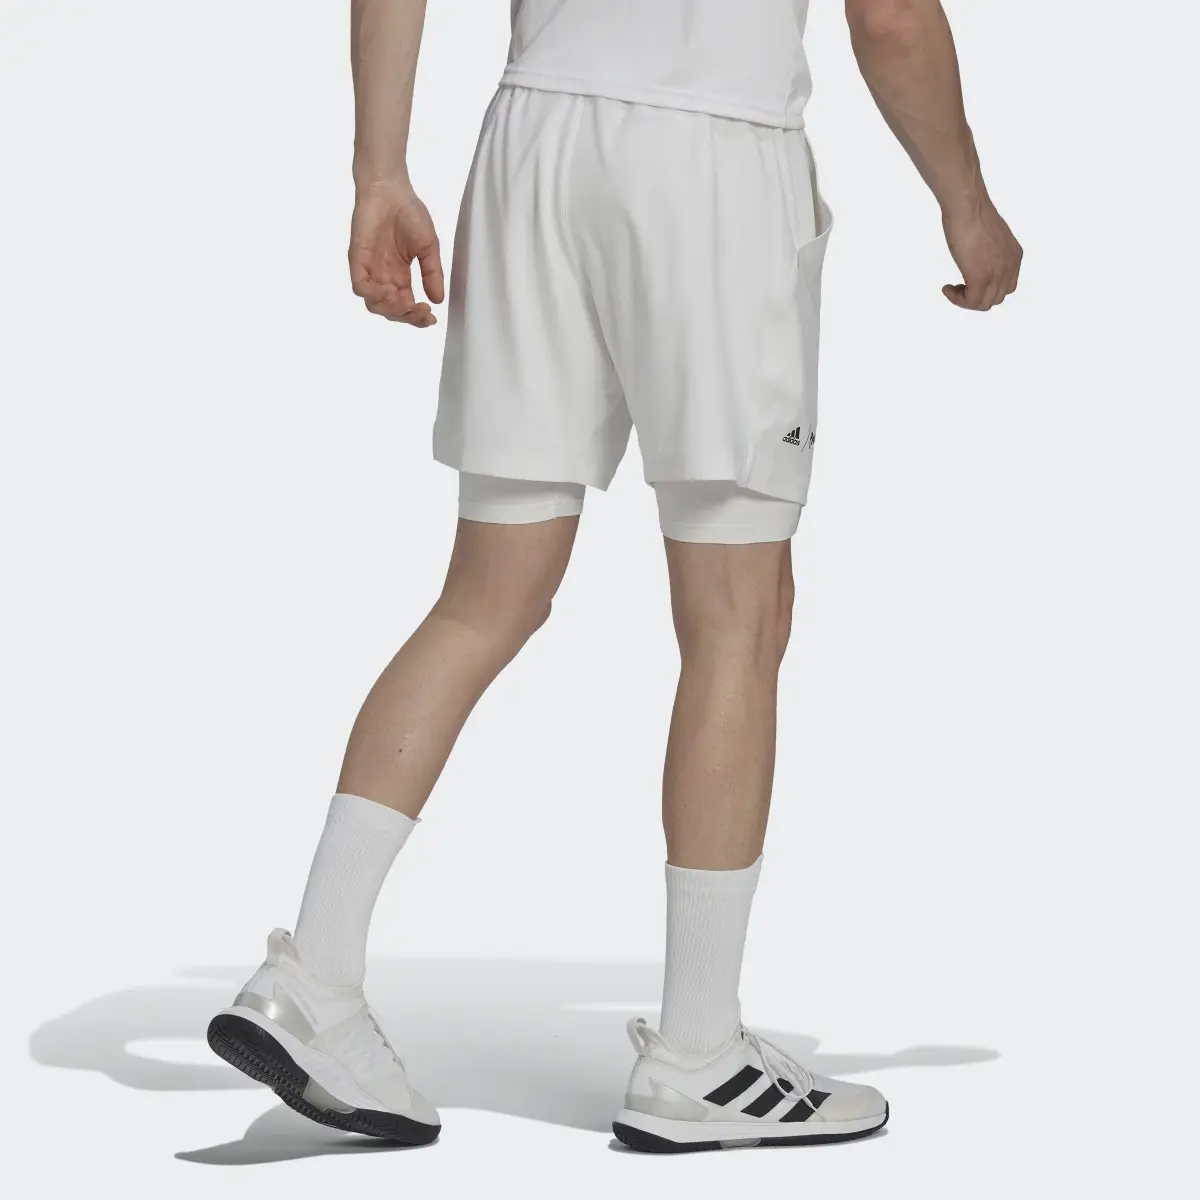 Adidas London Two-in-One Shorts. 2